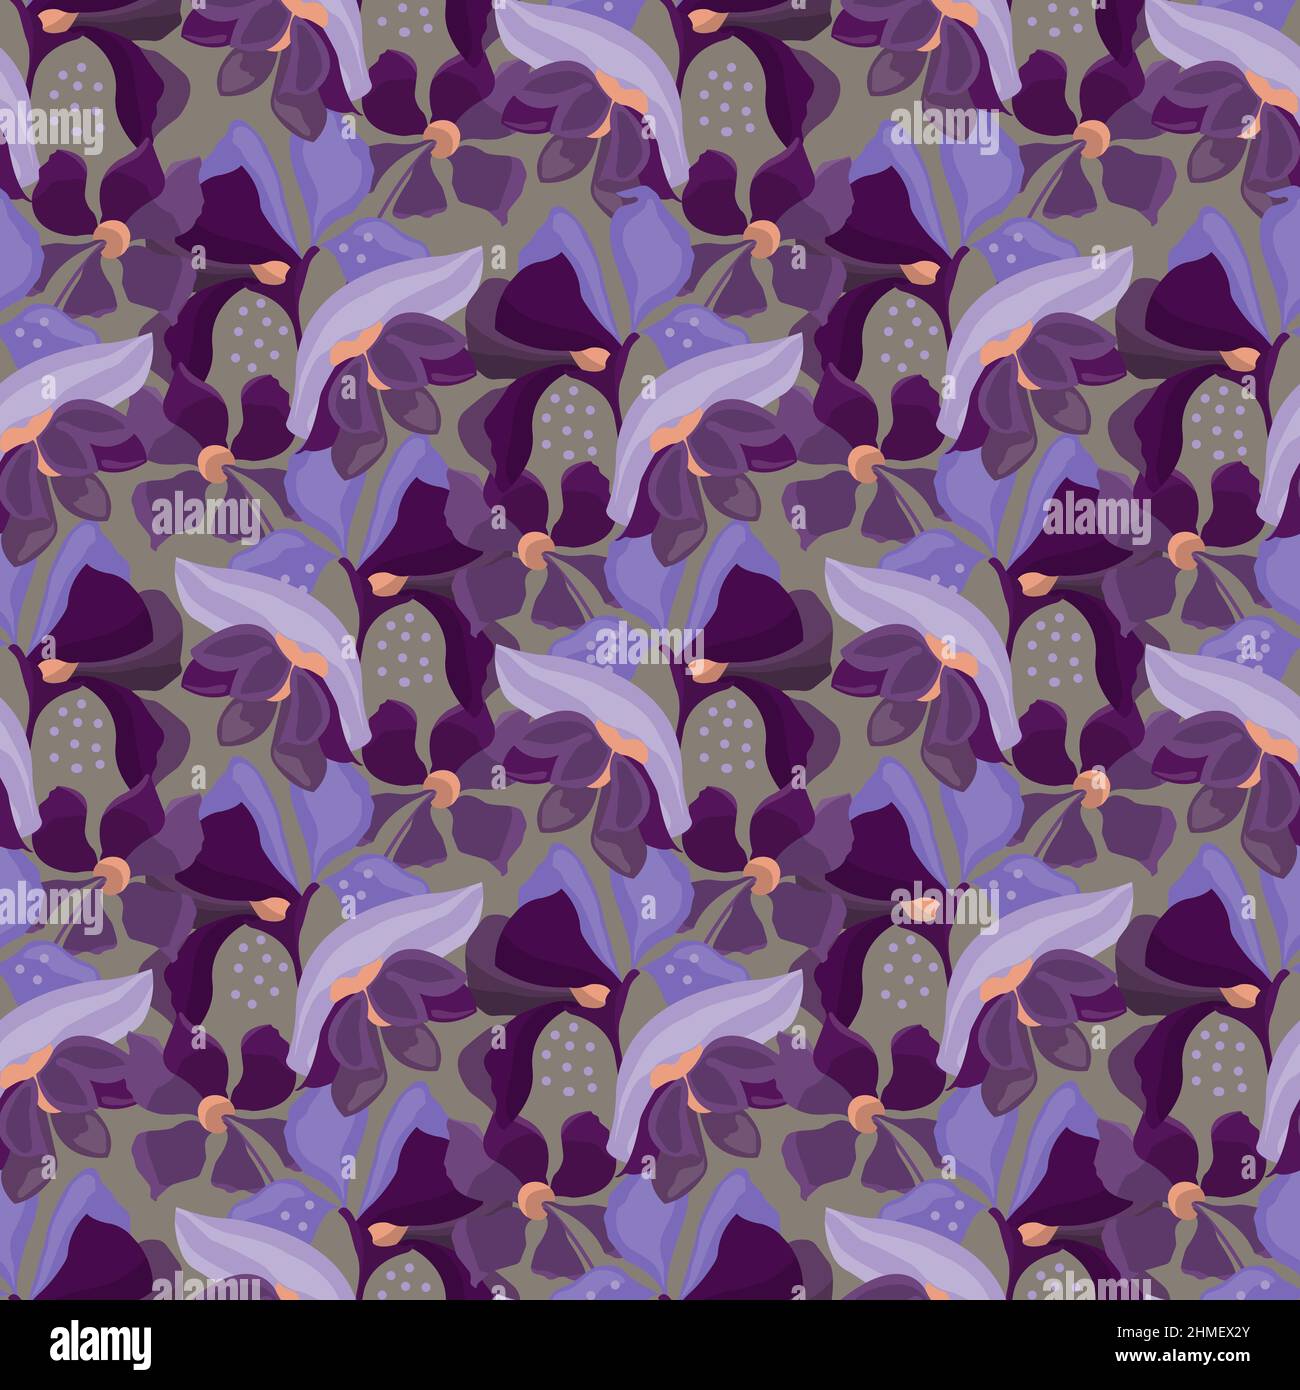 Vector floral seamless pattern. Purple and burgundy flowers on a gray background.  Stock Vector